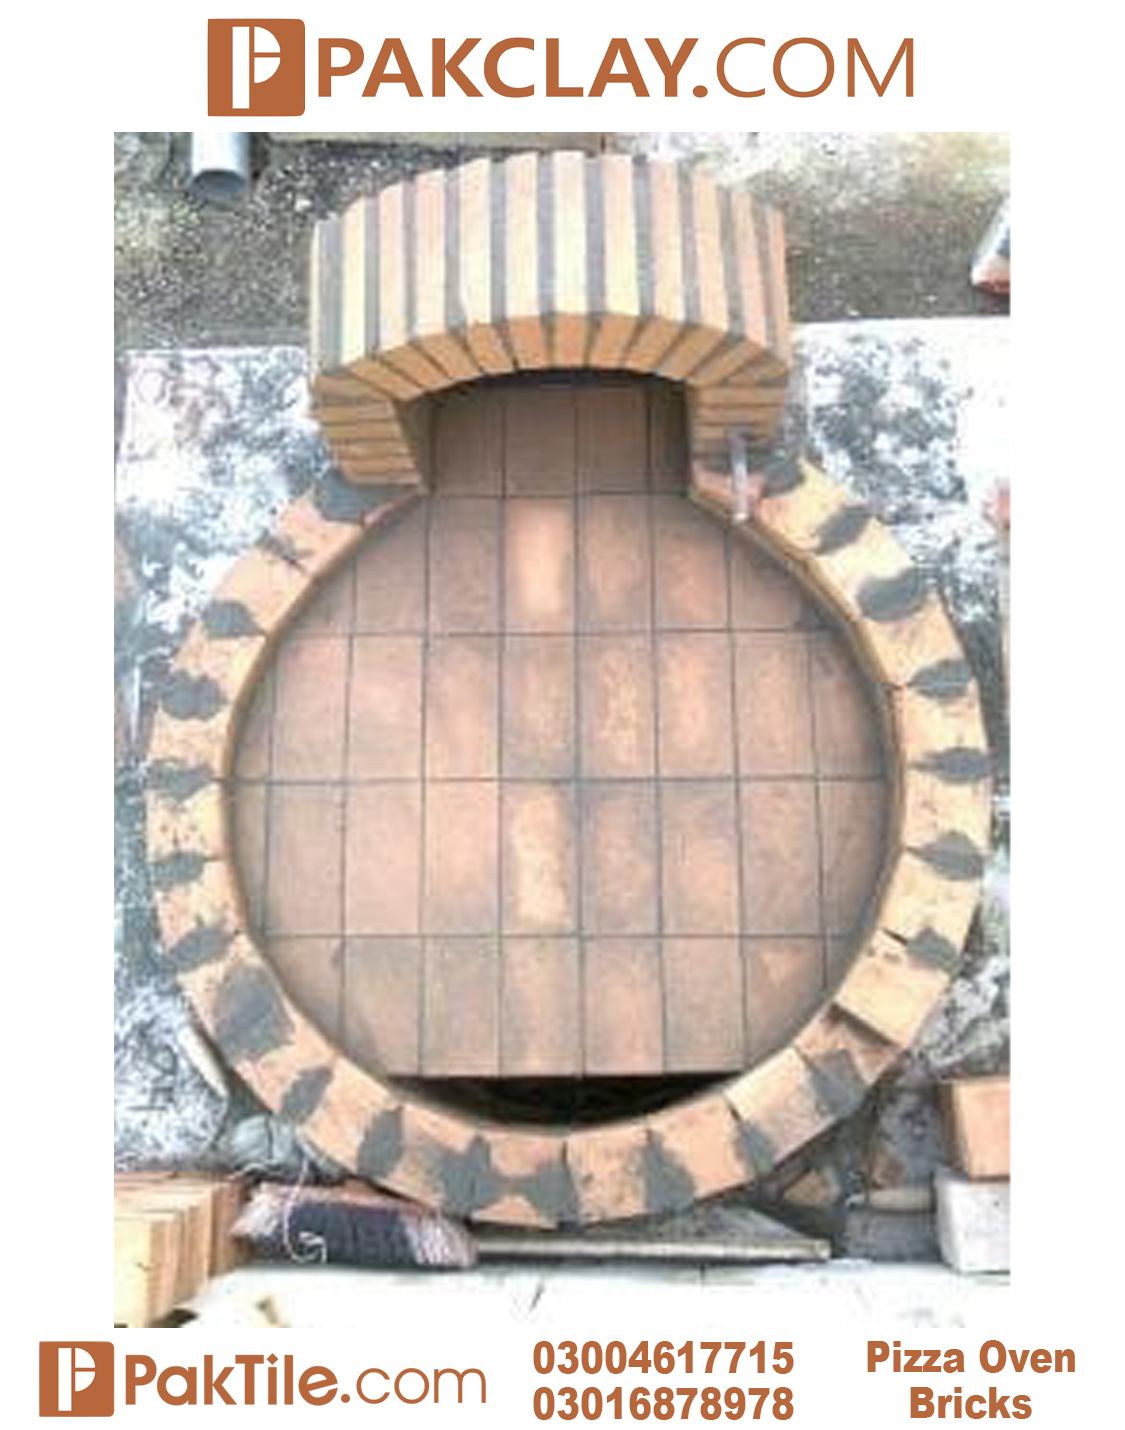 3 How to build an outdoor pizza oven step by step